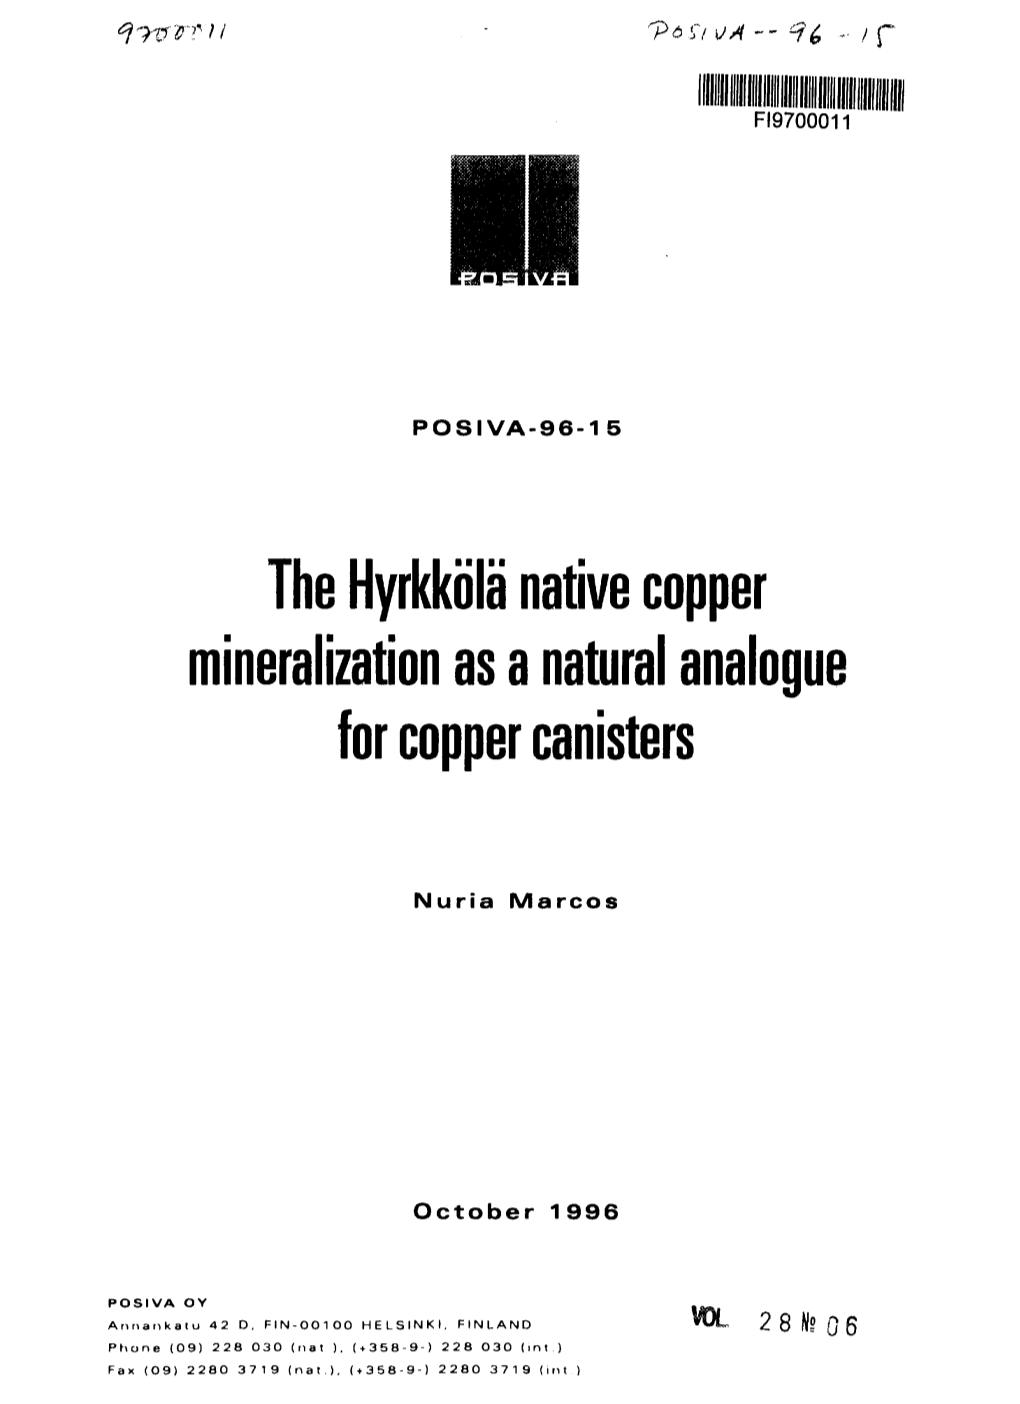 The Hyrkkbla Native Copper Mineralization As a Natural Analogue for Copper Canisters